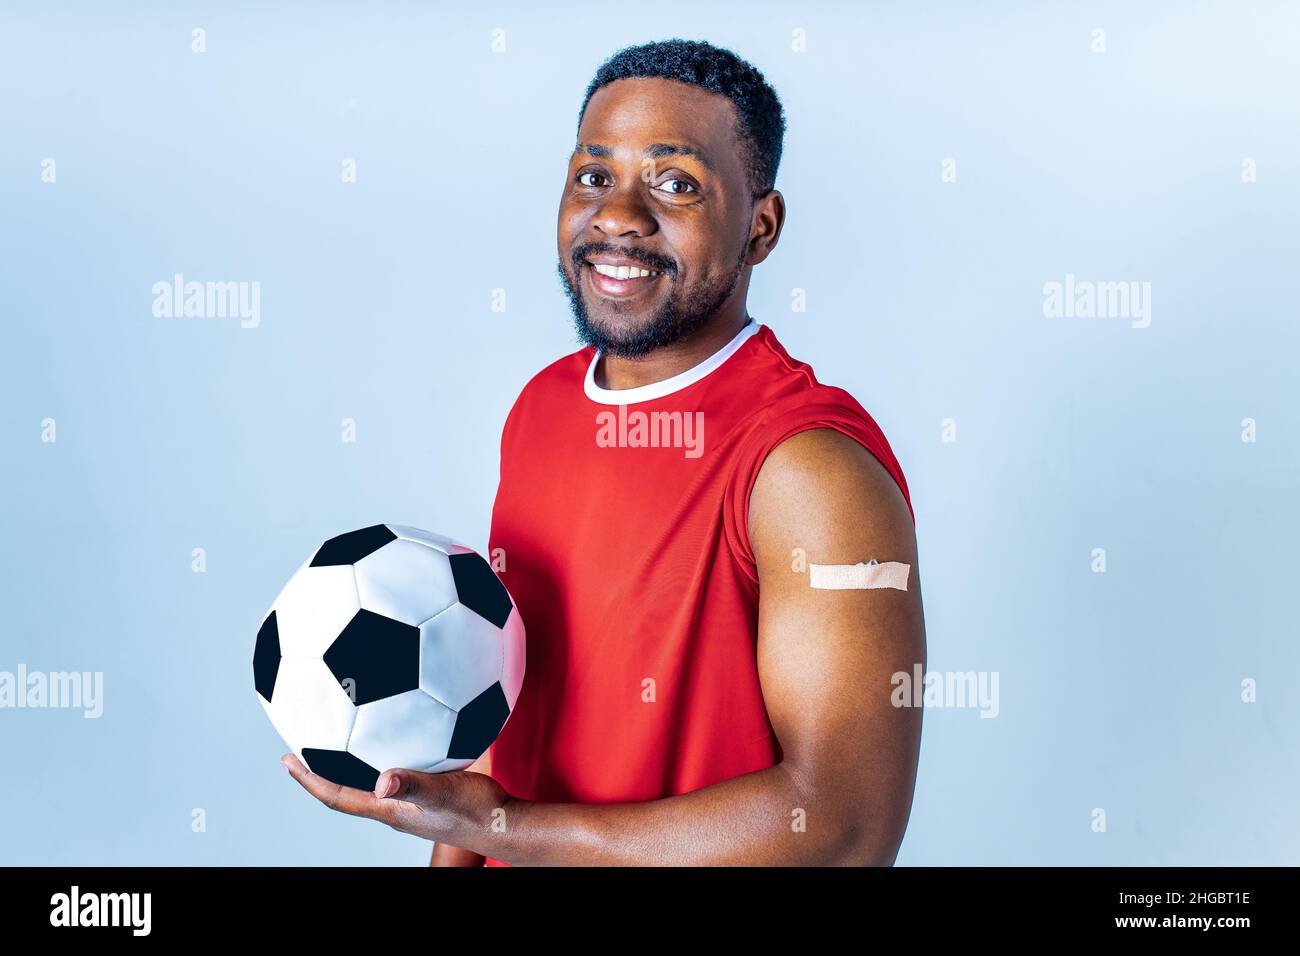 afro american sportsman showing his arm after receiving a vaccine in studio Stock Photo